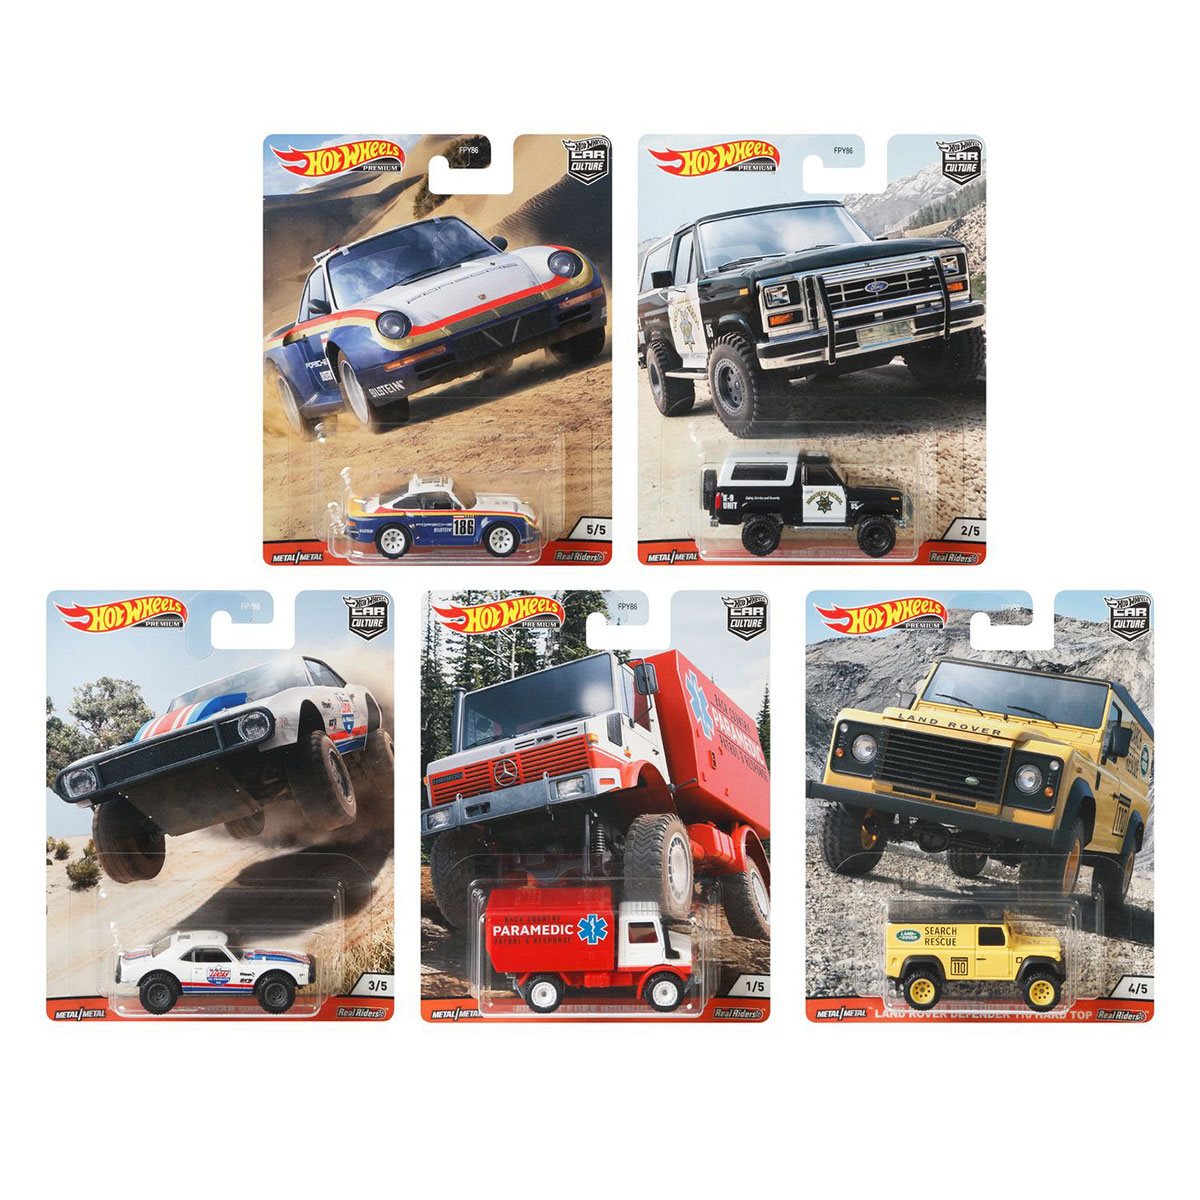 Premium Collection of Car Culture 1:64 Scale Vehicle Hot Wheels Car Culture Circuit Legends Porsche 959 Vehicle for 3 Kids Years Old & Up 